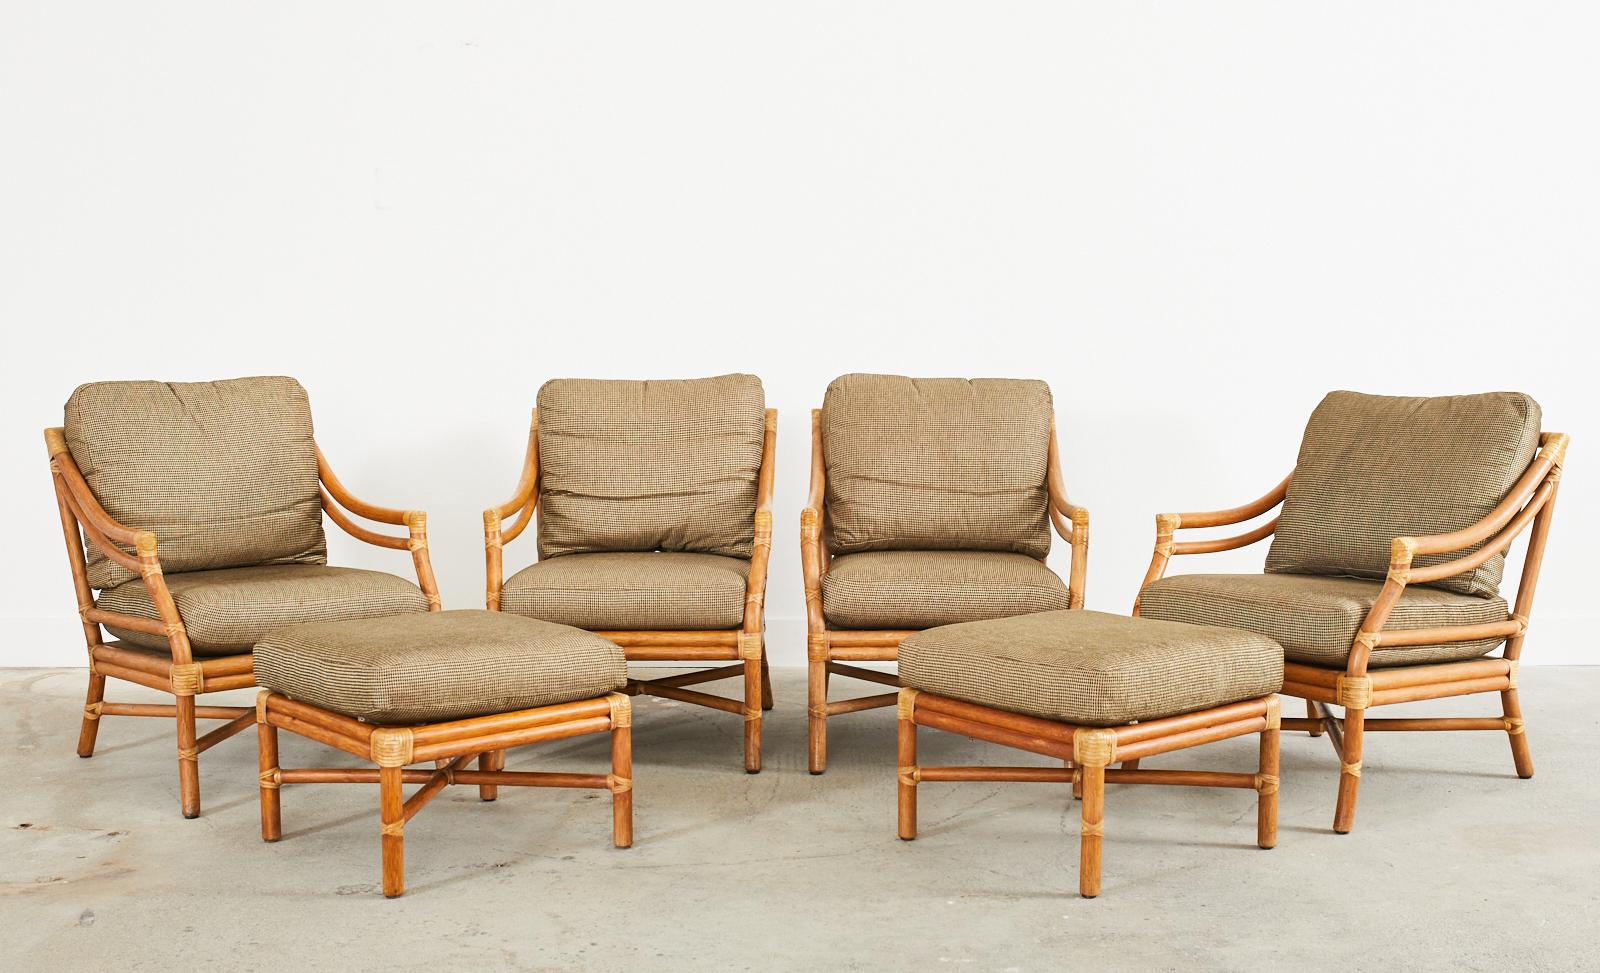 Iconic set of four McGuire rattan lounge chairs or armchairs and two ottomans. Model number MCA43 features a large, low-slung rattan frame having the famous target design back splat. The back is conjoined to gracefully curved double arms attached to